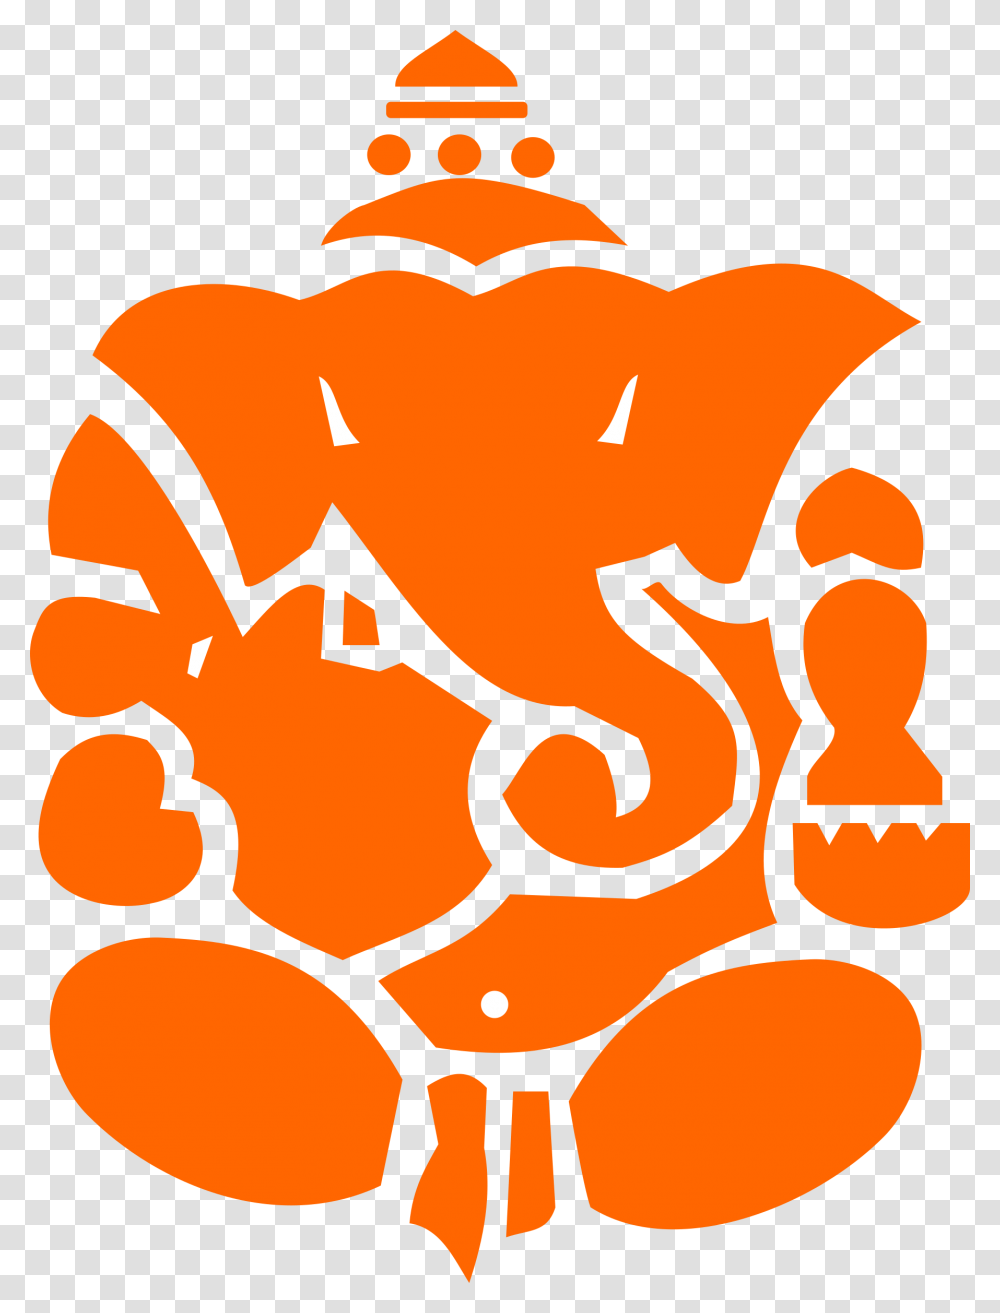 Thumb Image Ganesh Chaturthi Wishes In English, Number, Food Transparent Png